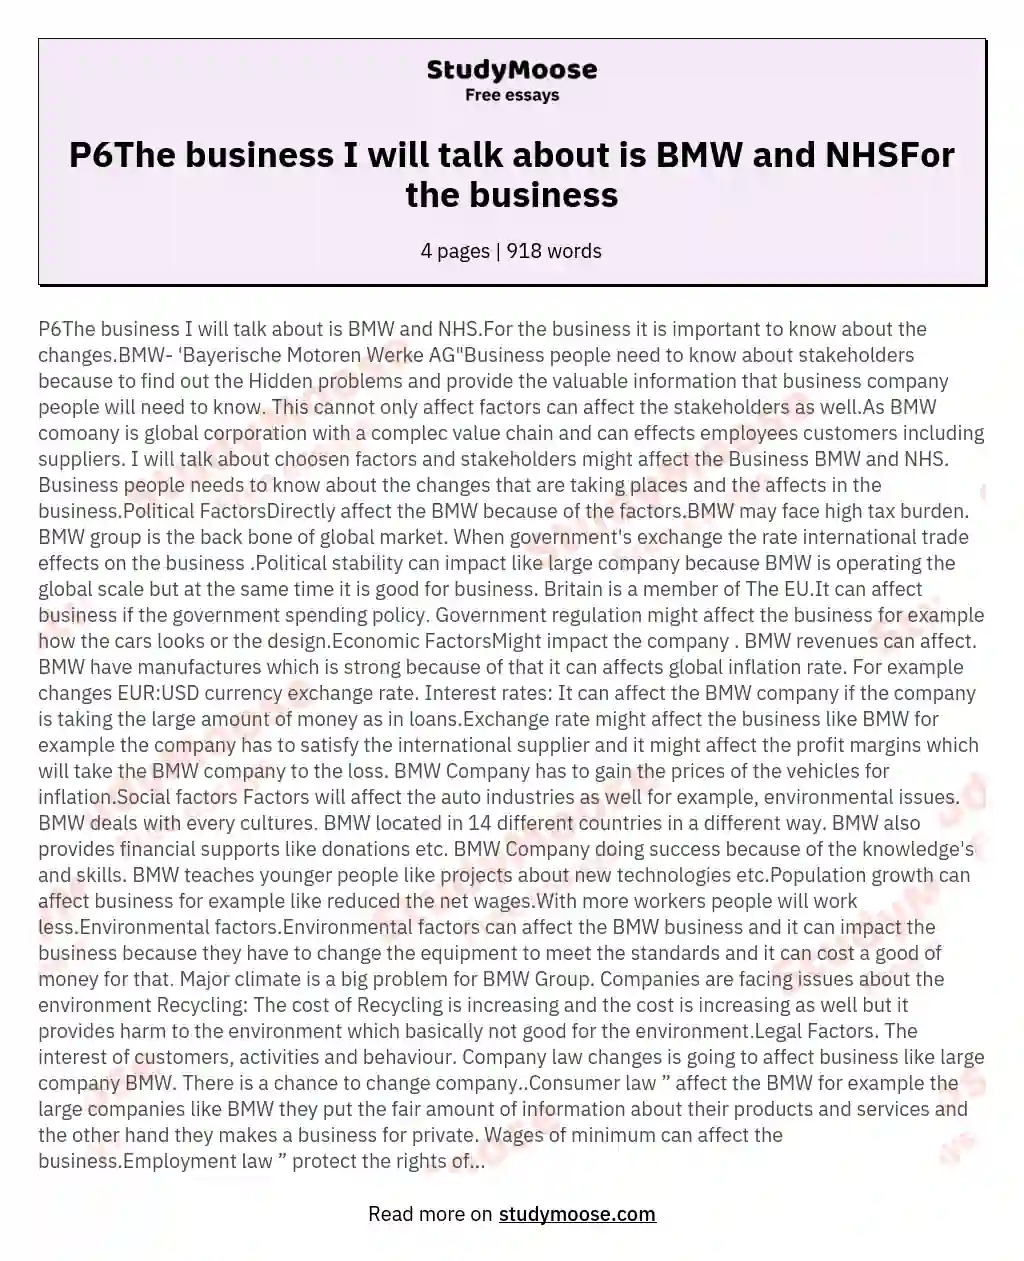 P6The business I will talk about is BMW and NHSFor the business essay